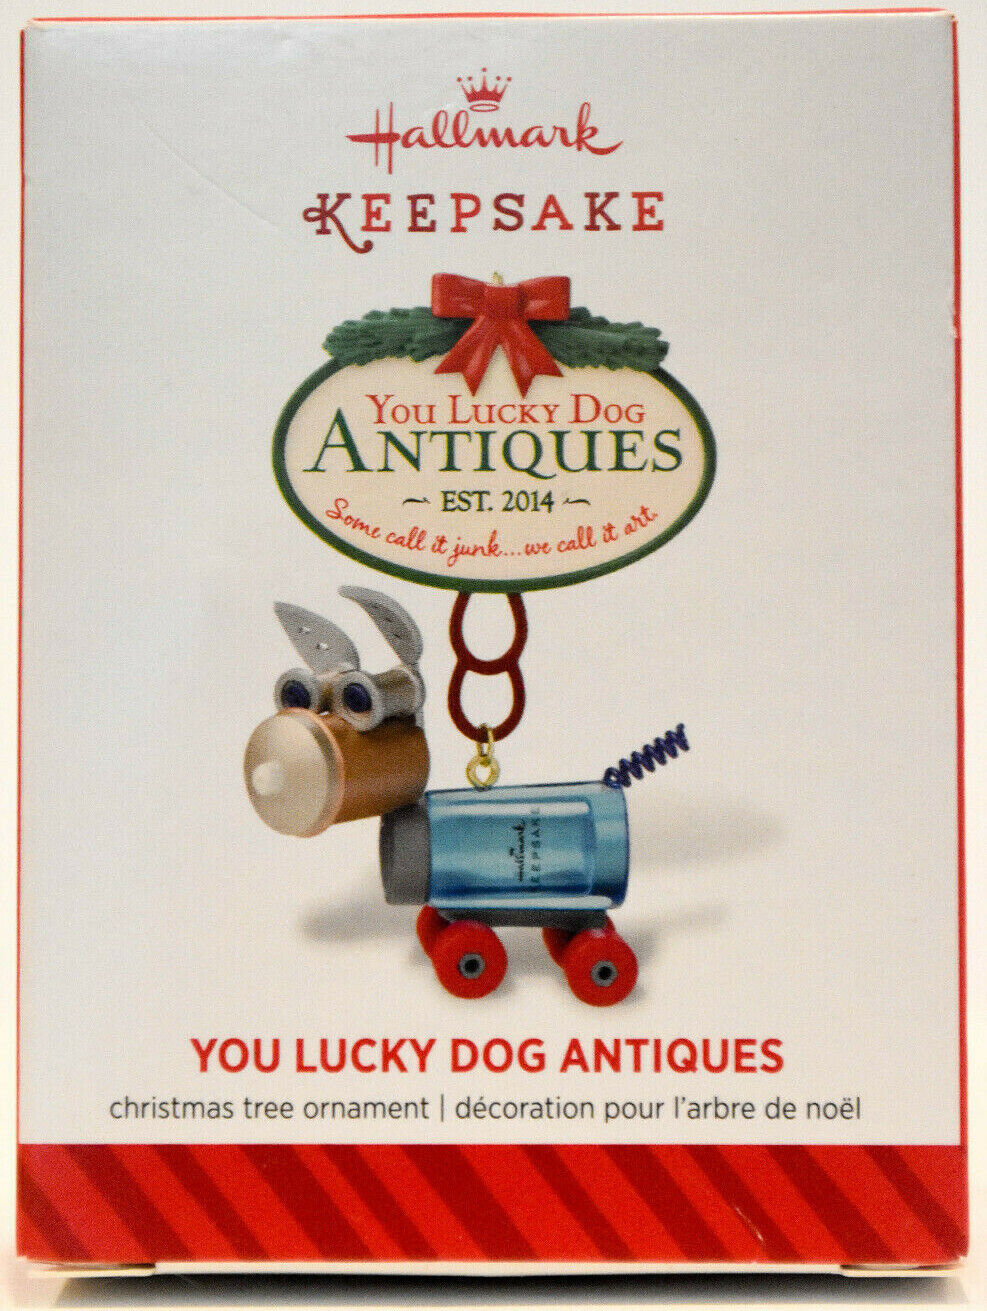 Hallmark - You Lucky Dog Antiques - Some Call it Junk We Call It Art - Ornament